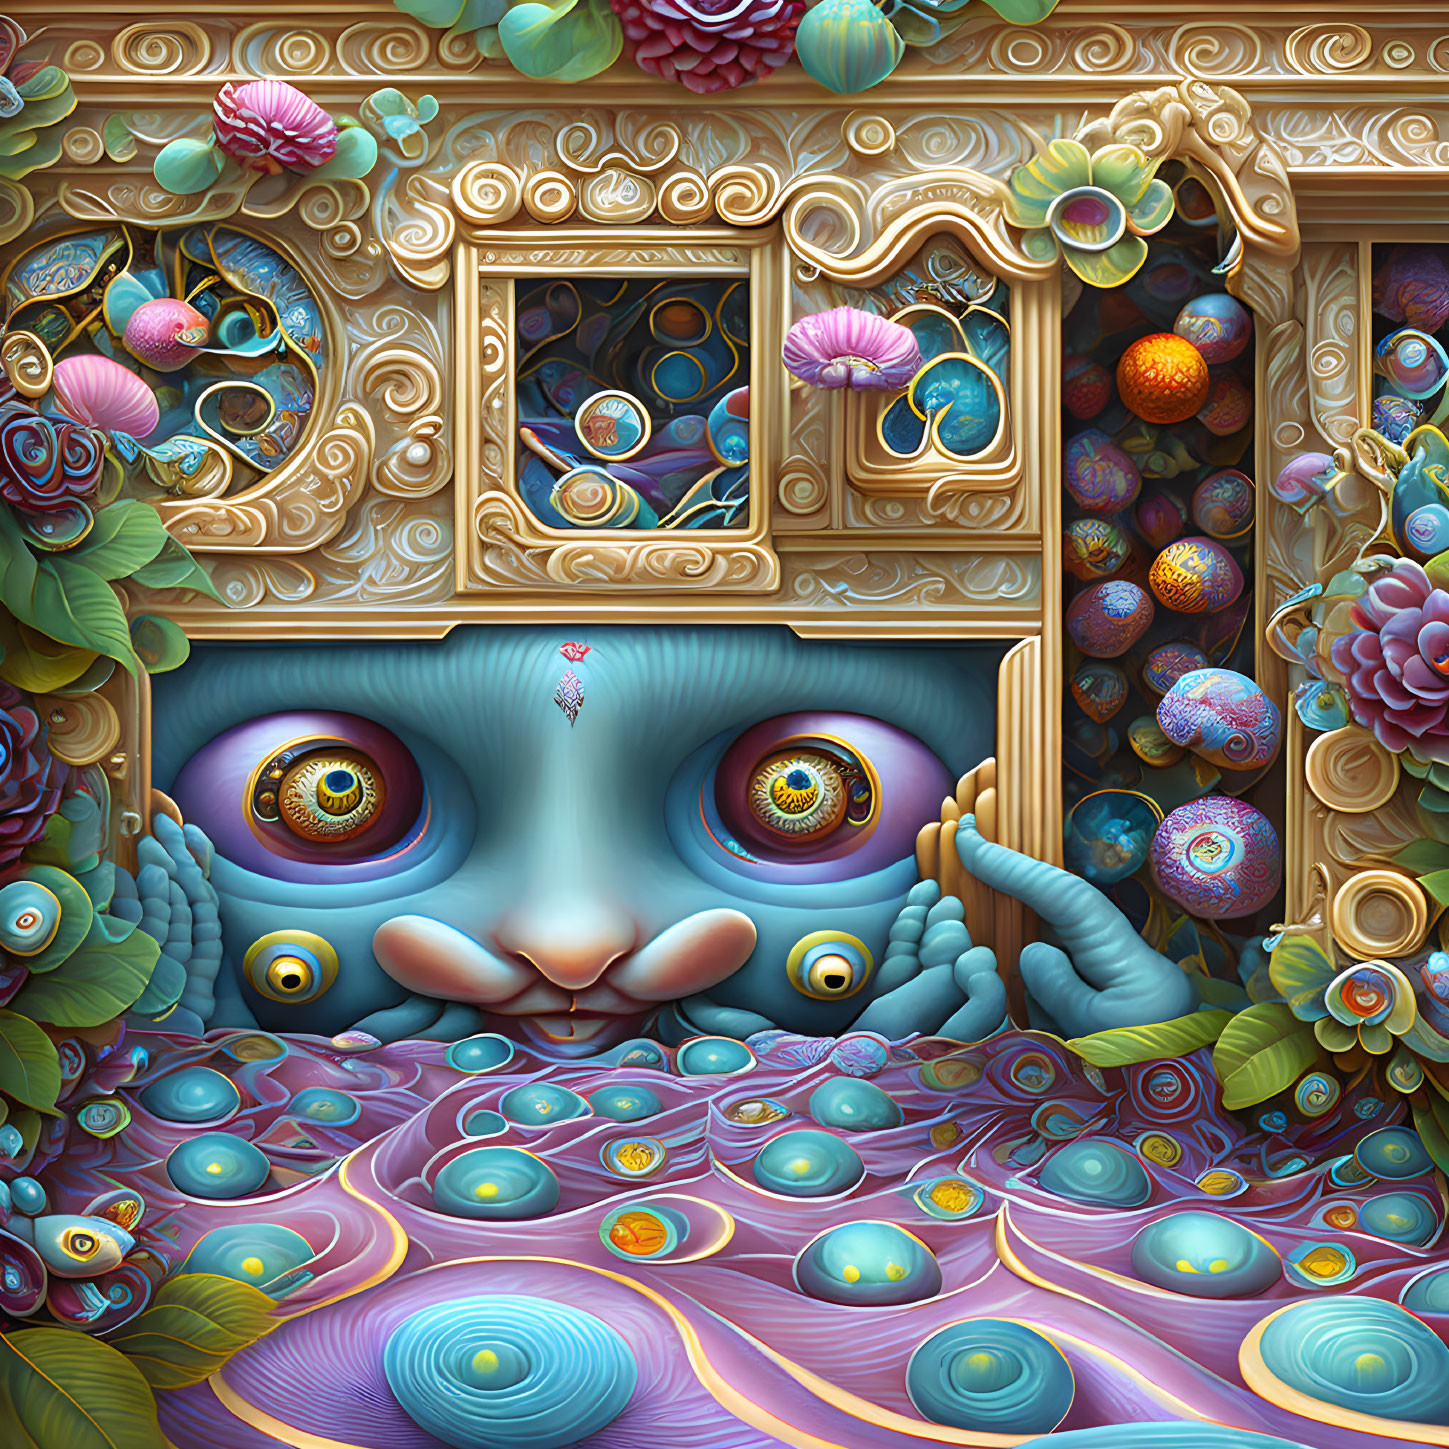 Colorful surreal artwork: Whimsical creature with large eyes in ornate floral frame.